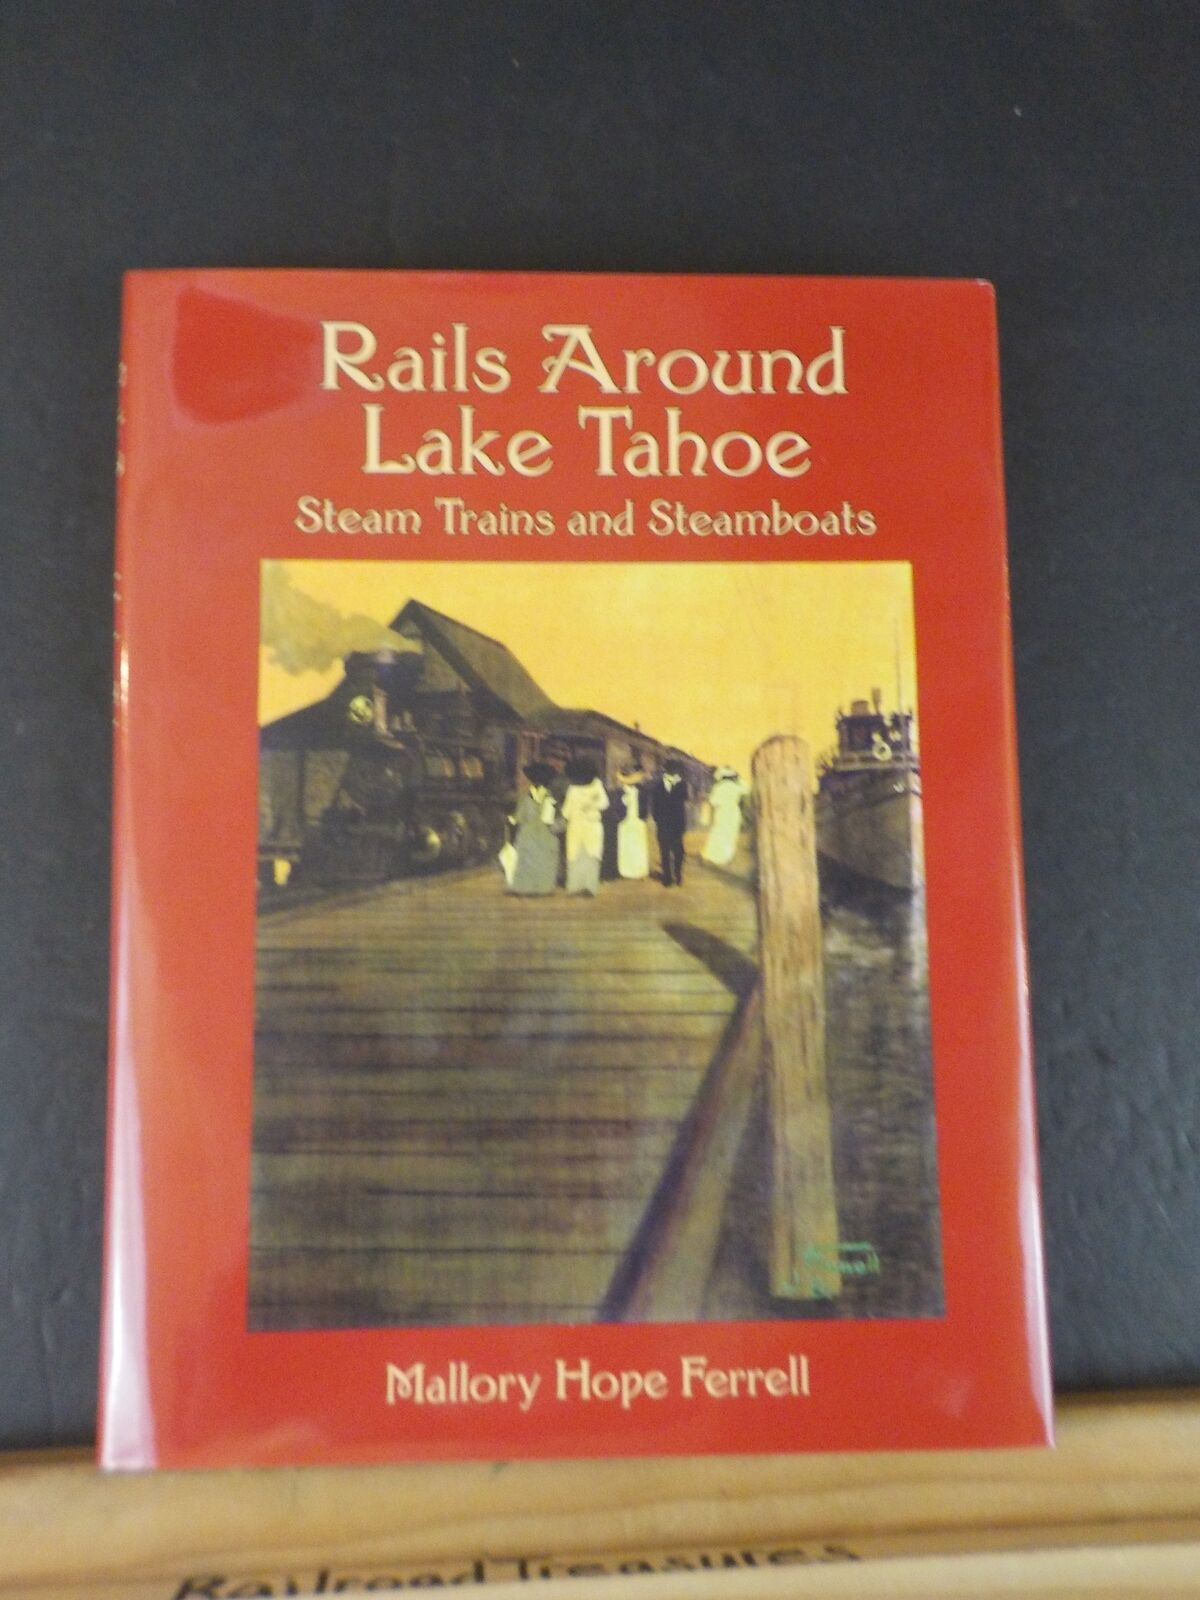 Rails Around Lake Tahoe by Mallory Hope Ferrell Steam trains and Steamboats w/DJ